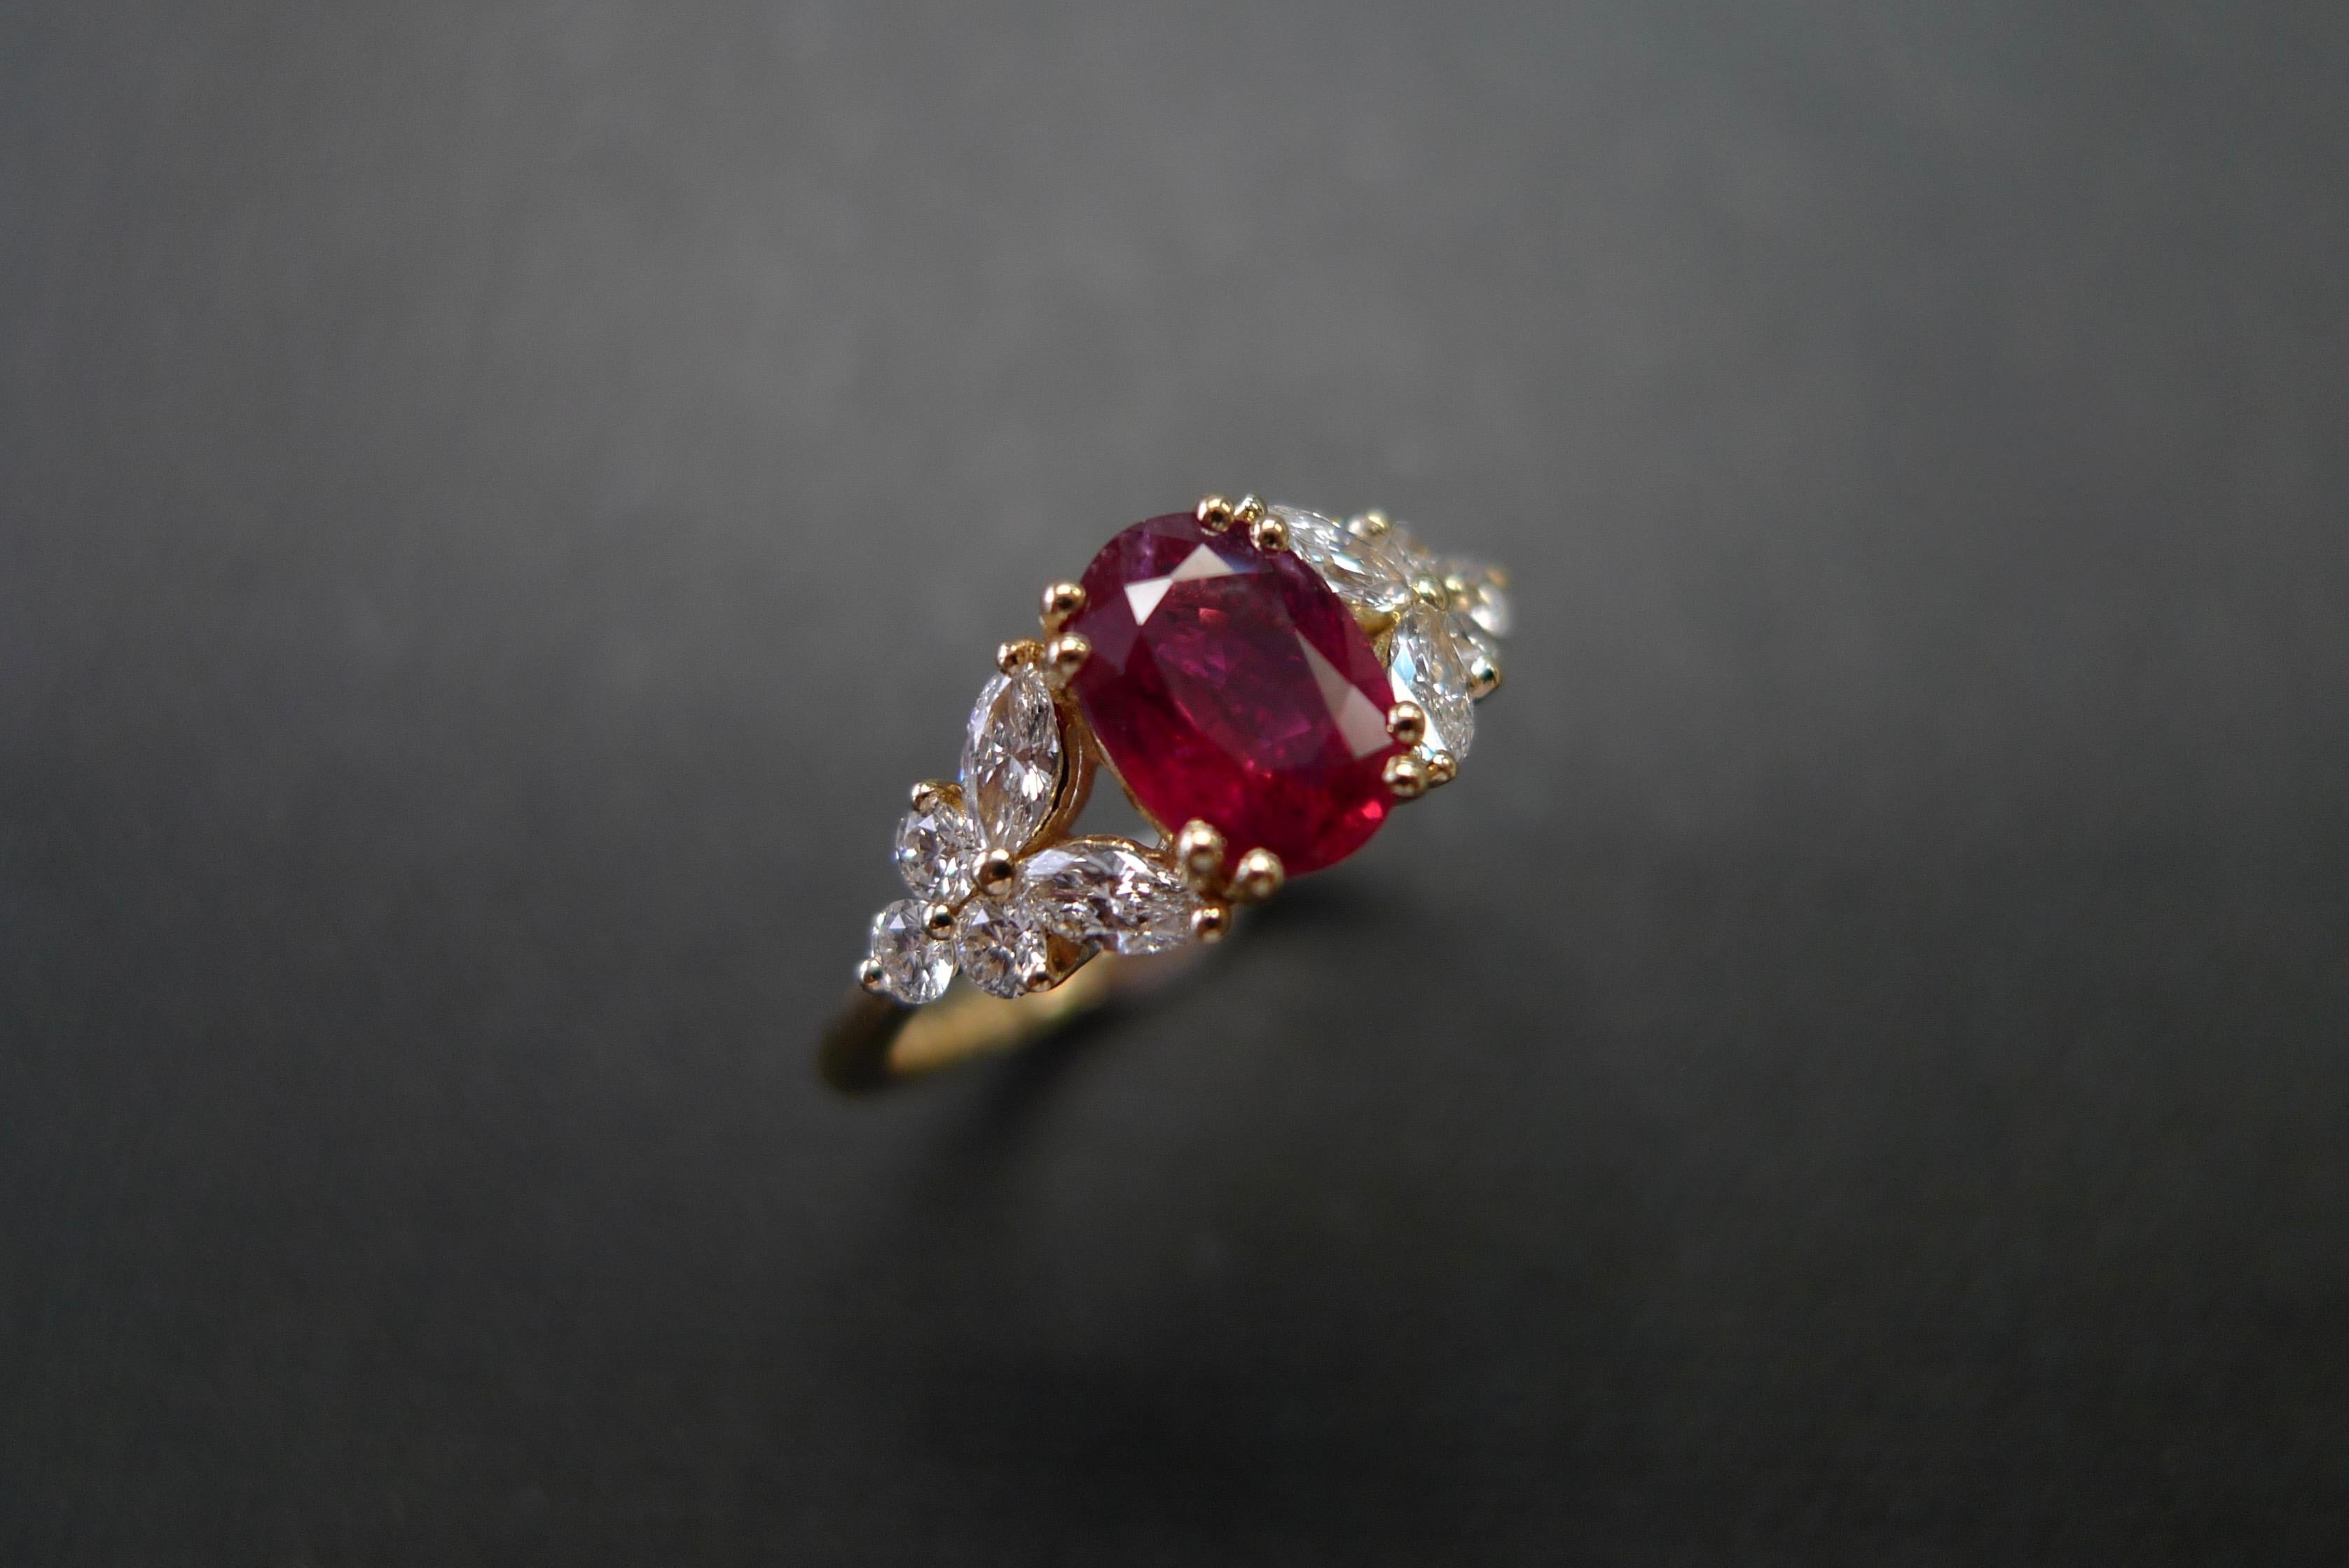 For Sale:  Natural Genuine Ruby and Marquise Diamonds Ring Made in 14k Yellow Gold  7